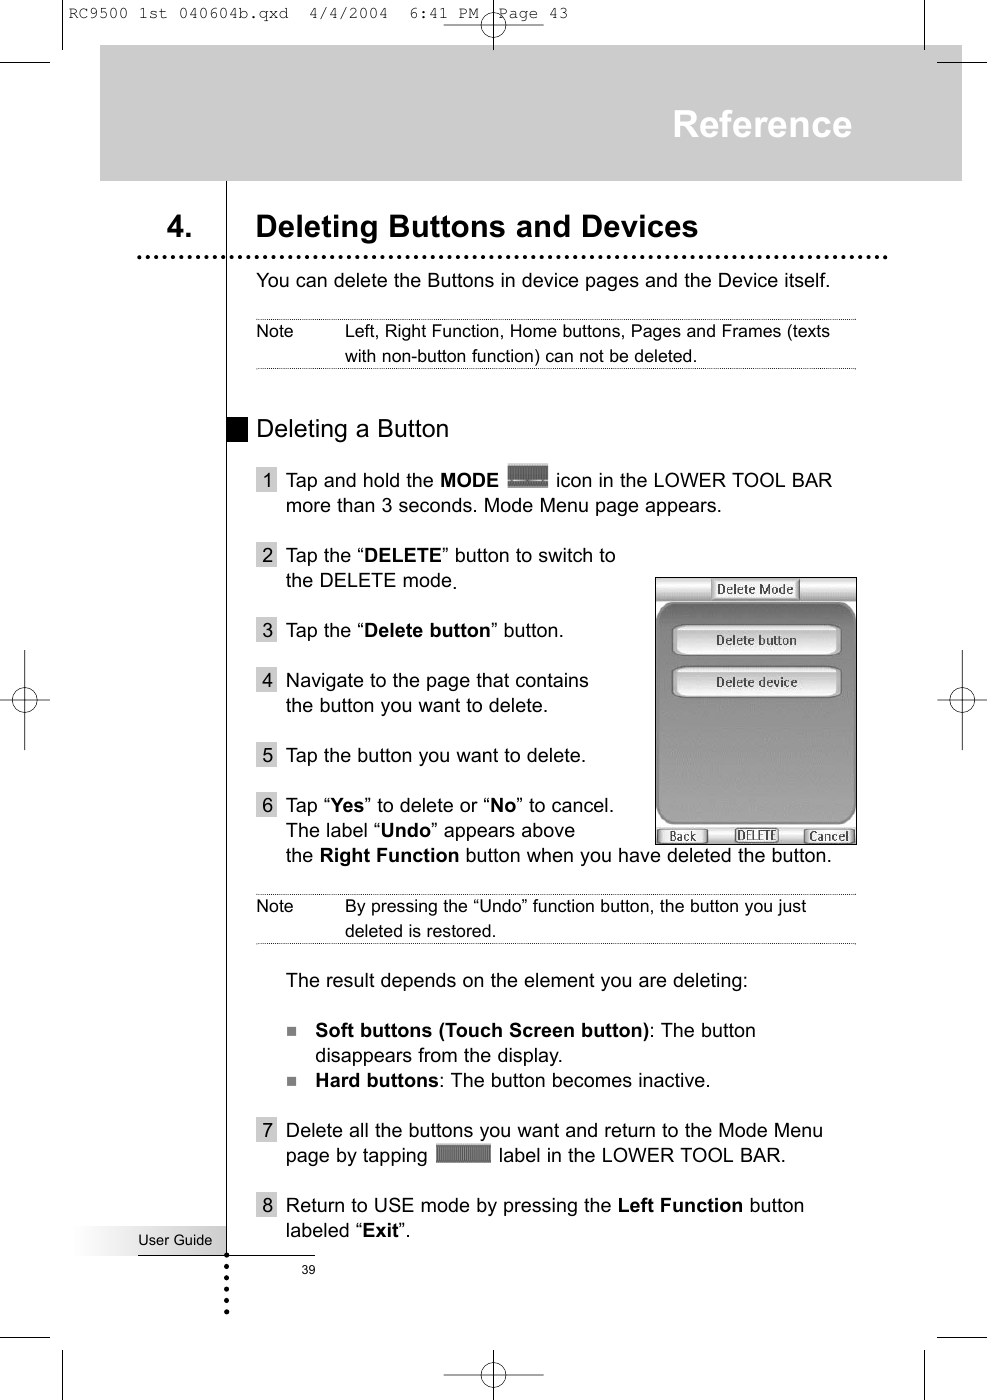 User Guide39You can delete the Buttons in device pages and the Device itself.Note Left, Right Function, Home buttons, Pages and Frames (textswith non-button function) can not be deleted. Deleting a Button1 Tap and hold the MODE icon in the LOWER TOOL BARmore than 3 seconds. Mode Menu page appears.2 Tap the “DELETE” button to switch tothe DELETE mode.3 Tap the “Delete button” button.4 Navigate to the page that containsthe button you want to delete.5 Tap the button you want to delete.6 Tap “Yes” to delete or “No” to cancel. The label “Undo” appears above the Right Function button when you have deleted the button.Note By pressing the “Undo” function button, the button you justdeleted is restored. The result depends on the element you are deleting:Soft buttons (Touch Screen button): The buttondisappears from the display.Hard buttons: The button becomes inactive.7 Delete all the buttons you want and return to the Mode Menupage by tapping  label in the LOWER TOOL BAR.8 Return to USE mode by pressing the Left Function buttonlabeled “Exit”.Reference4. Deleting Buttons and DevicesRC9500 1st 040604b.qxd  4/4/2004  6:41 PM  Page 43